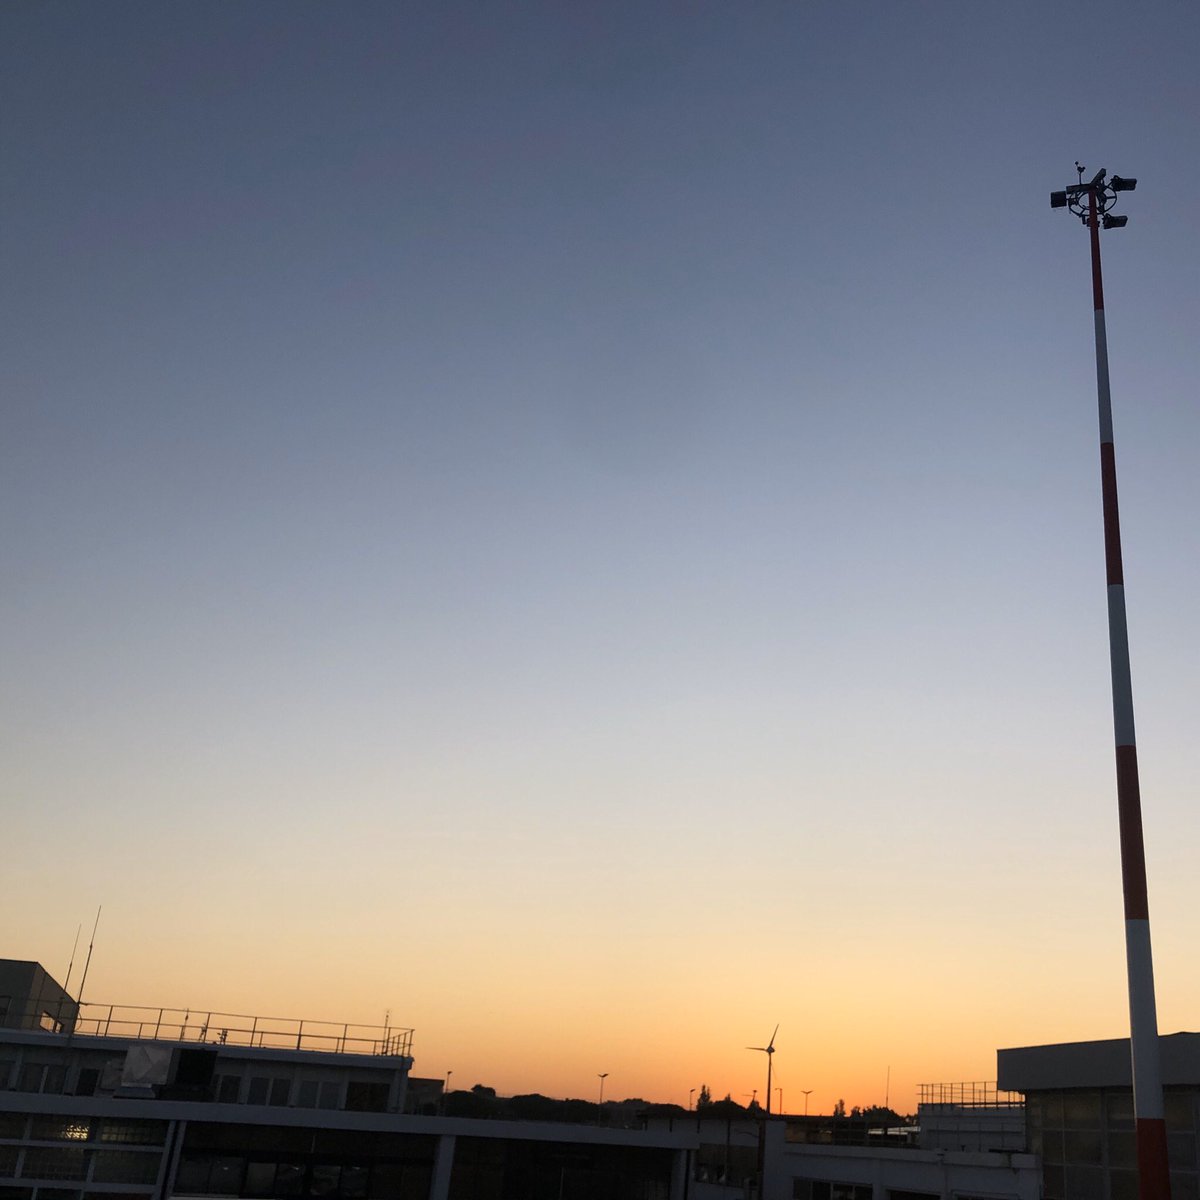 My final photo I’ve took during my time in Rome. This was when I was about to board the earliest plane ride I’ve had so far (being at around 7AM), where I’ve witnessed The Sun beginning to rise from afar, wishing everyone a wonderful good morning.